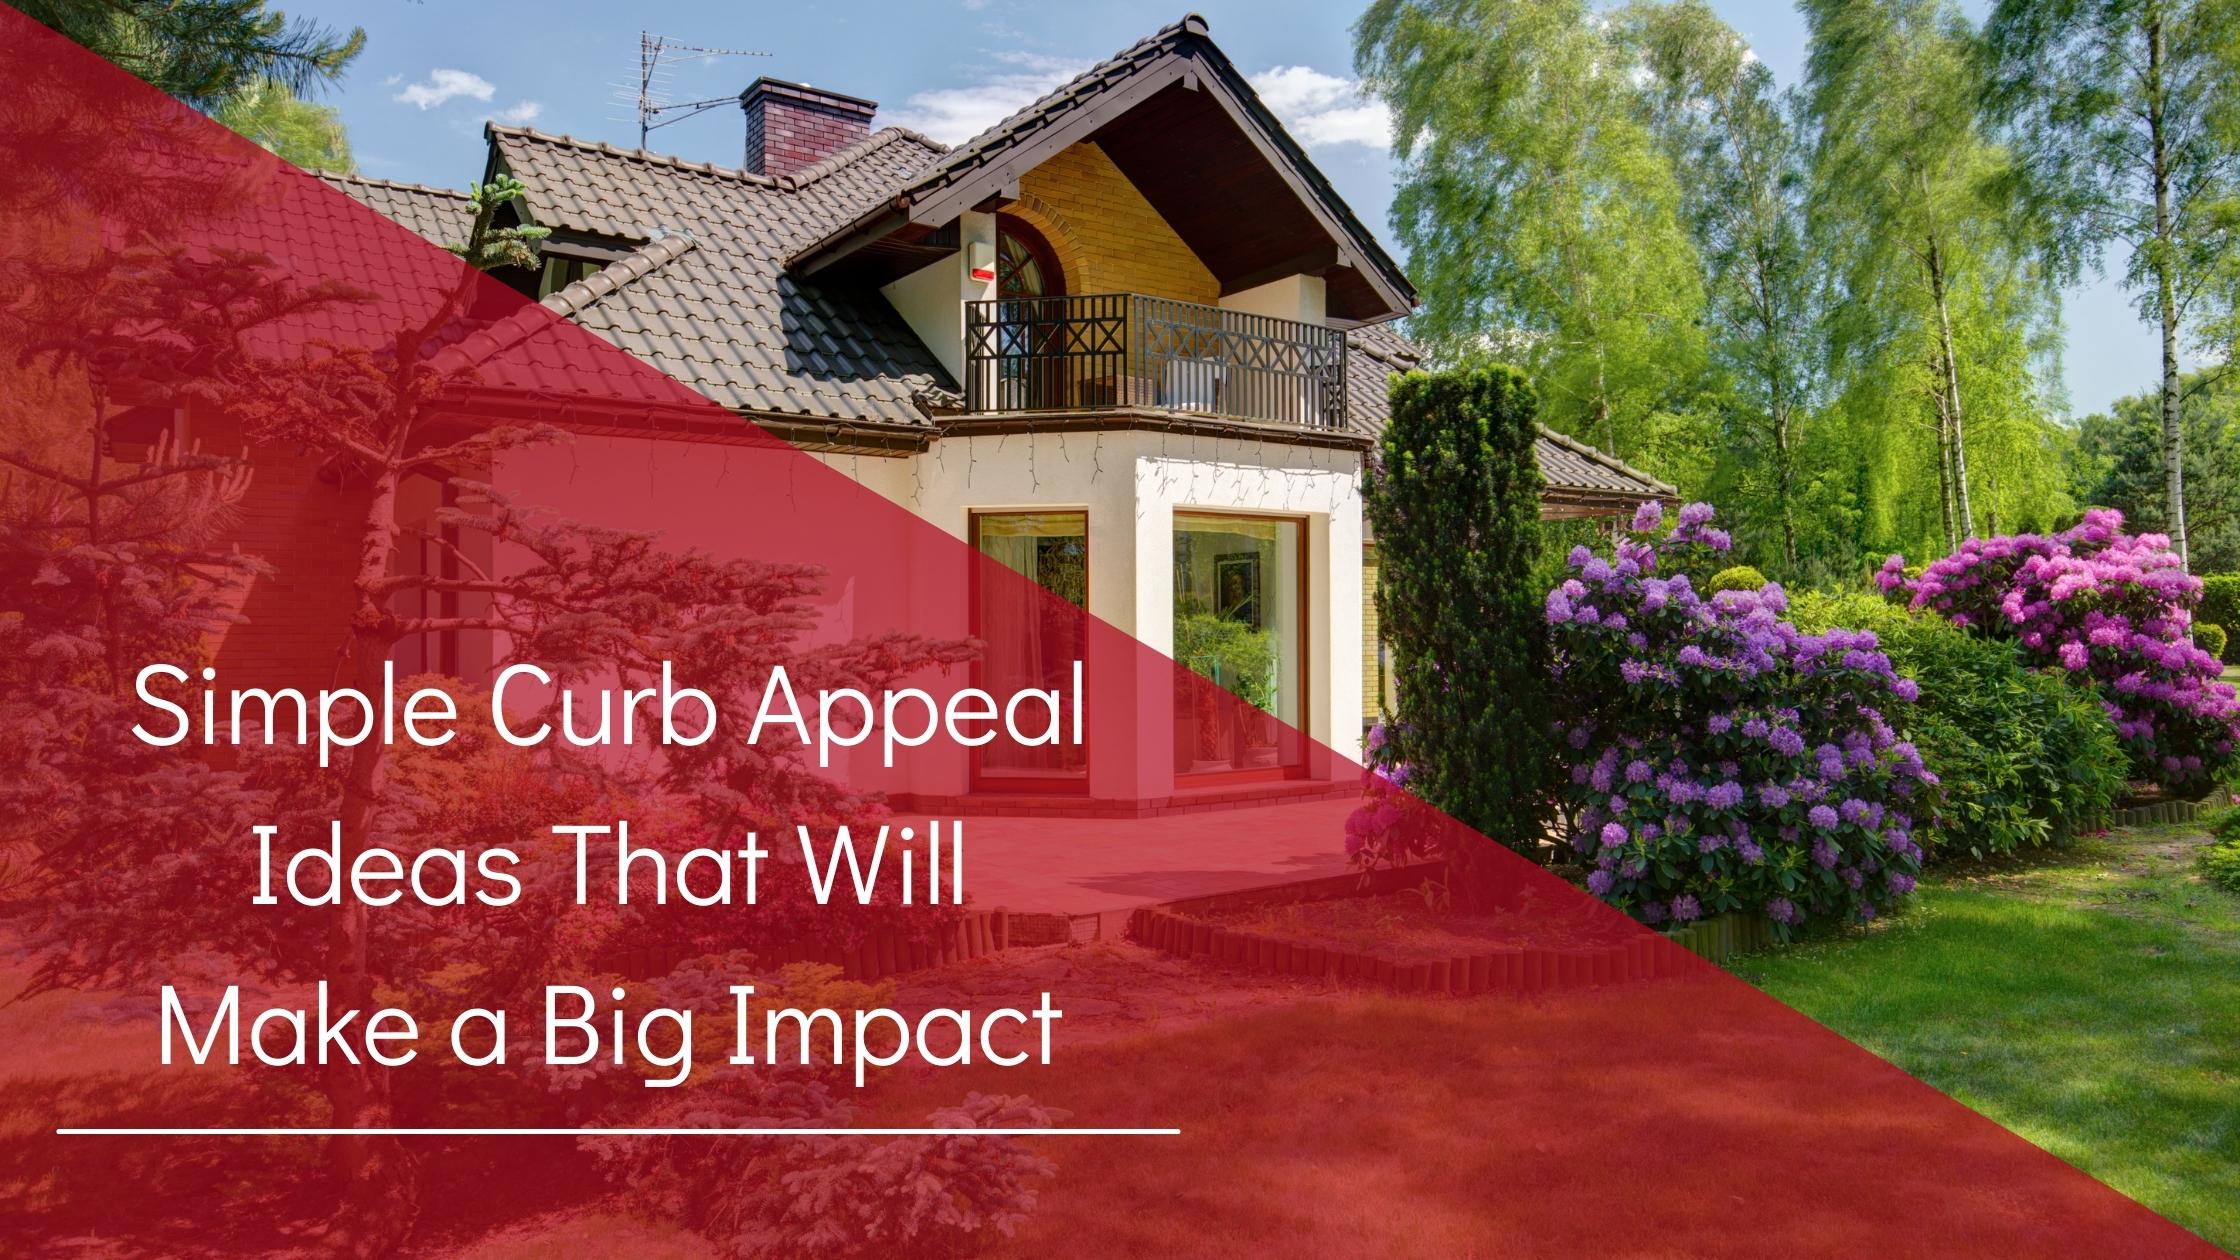 Simple Curb Appeal Ideas That Will Make a Big Impact